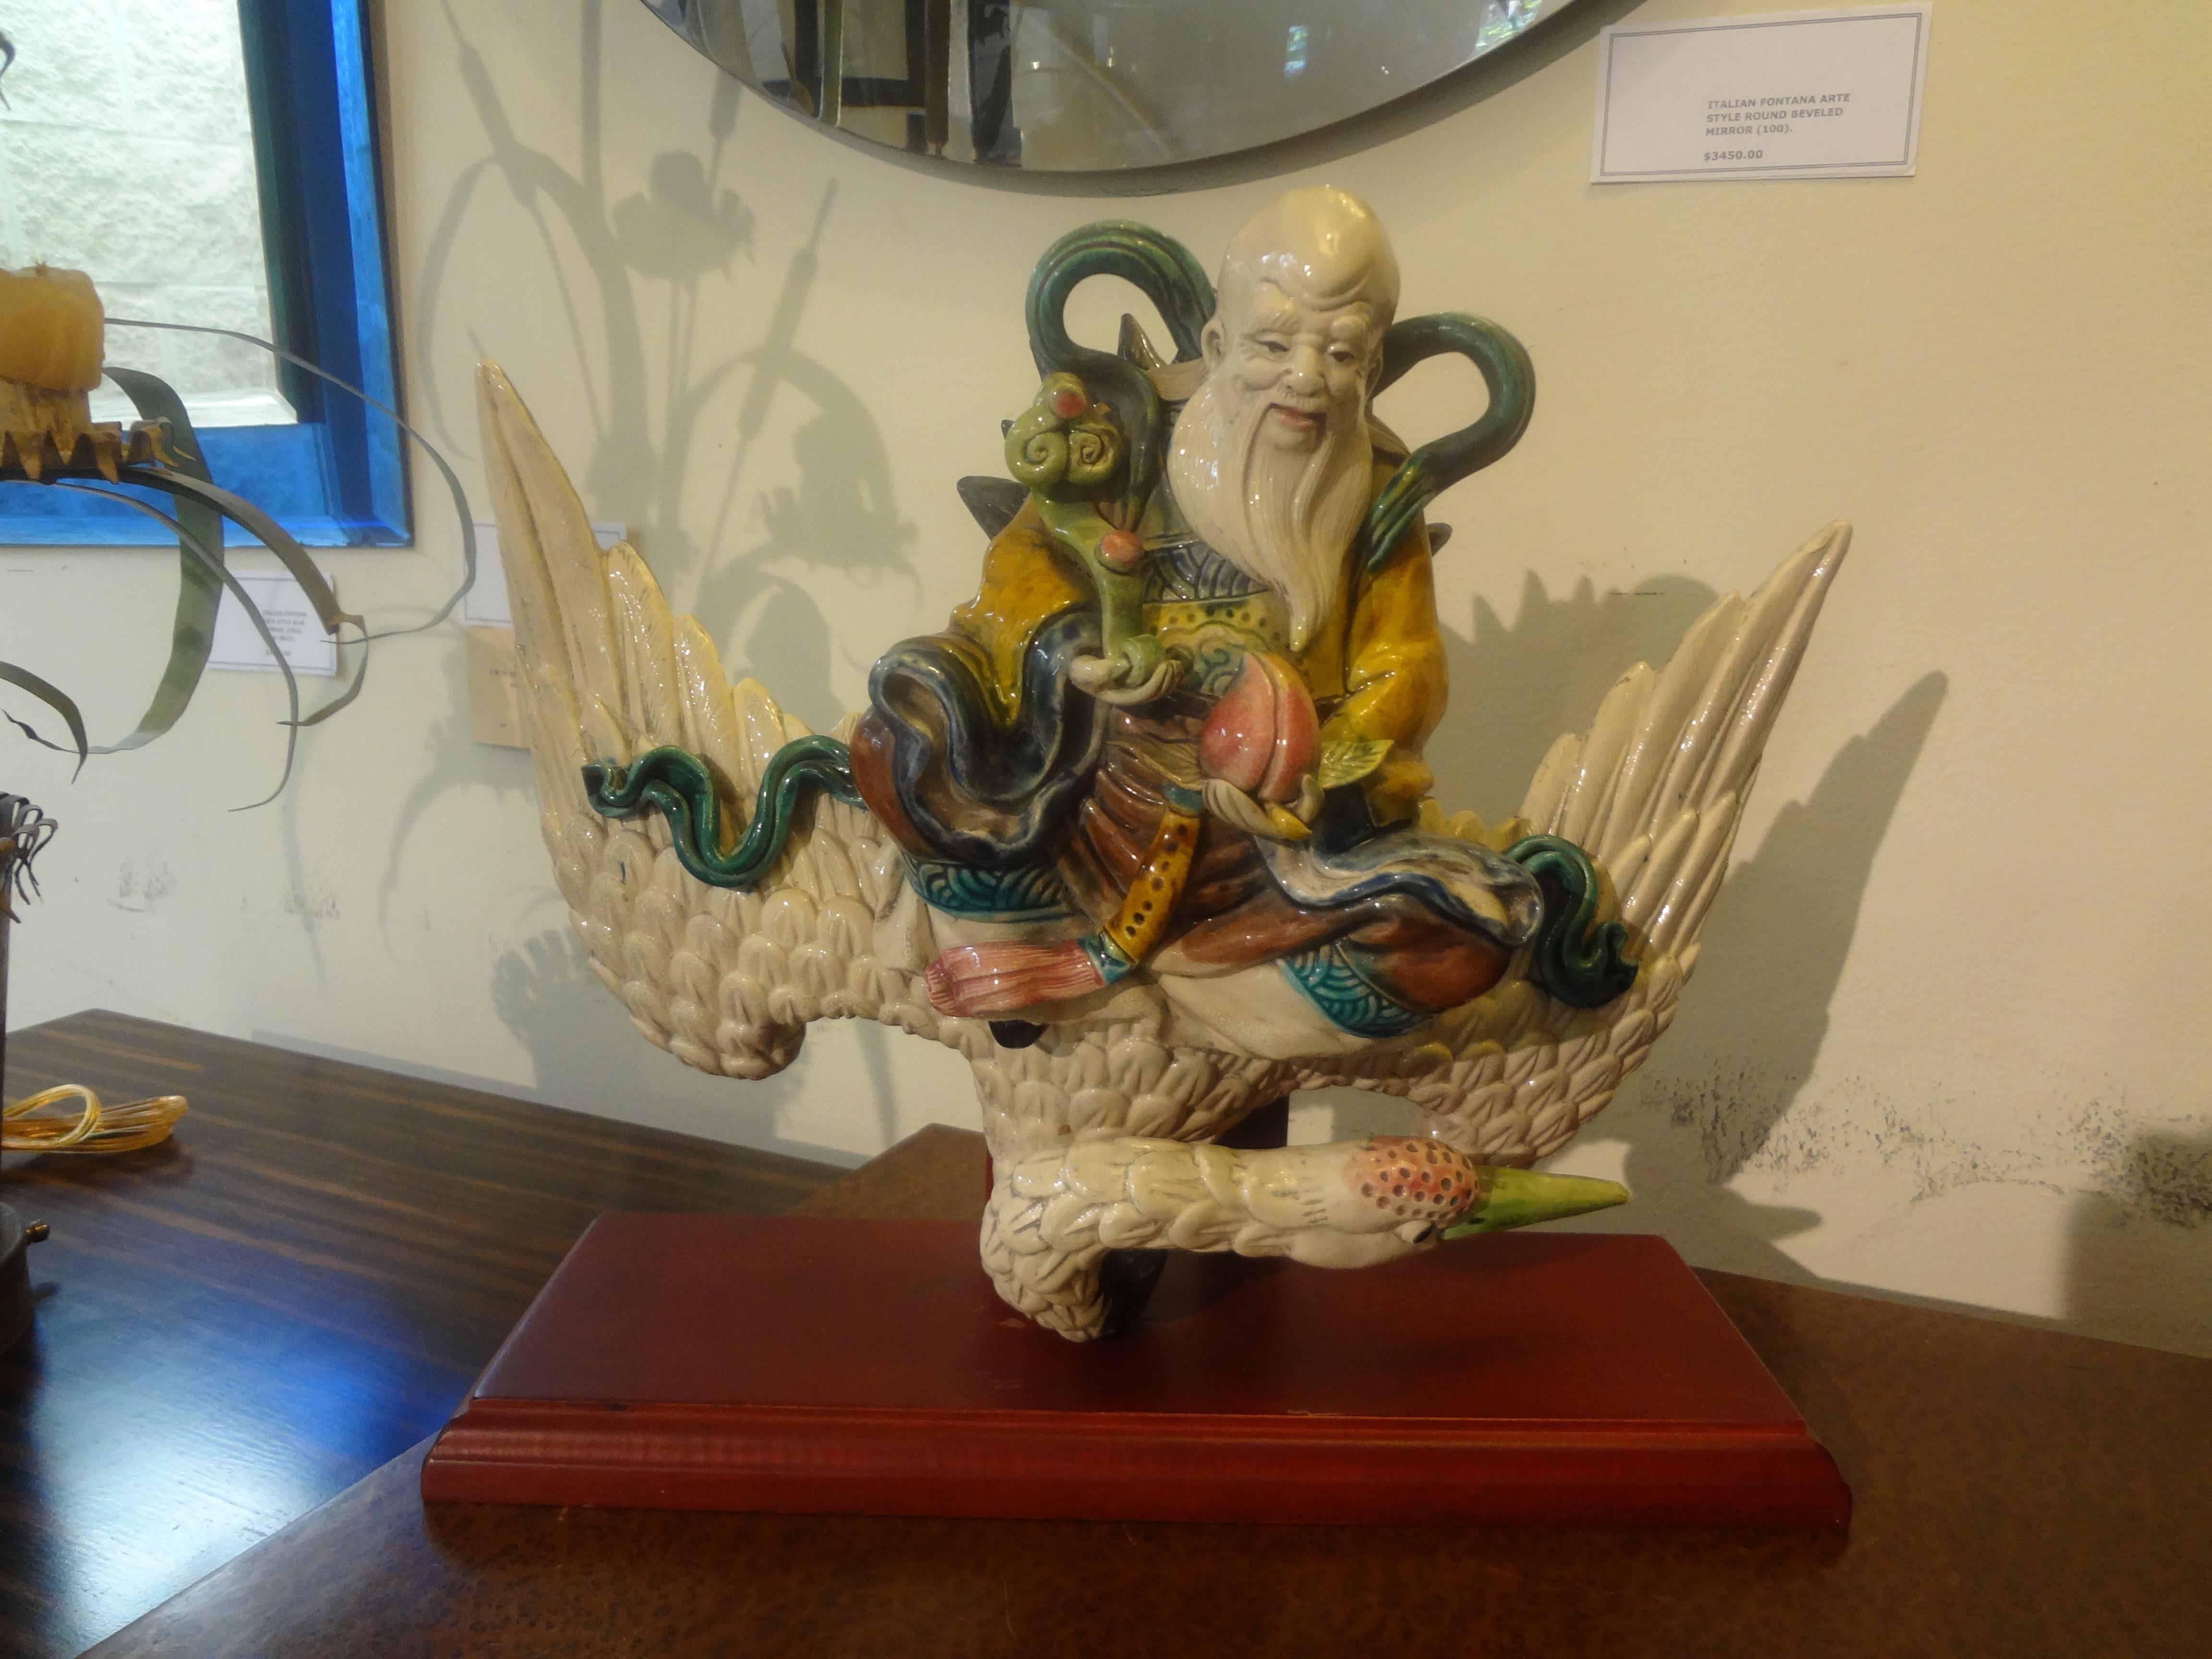 Late 19th-Early 20th Century Chinese Roof Tile.
Our lovely antique Chinese glazed pottery or porcelain roof tile depicts a warrior riding on a Phoenix bird. This piece is signed and  mounted on a custom wood stand.
Gorgeous!